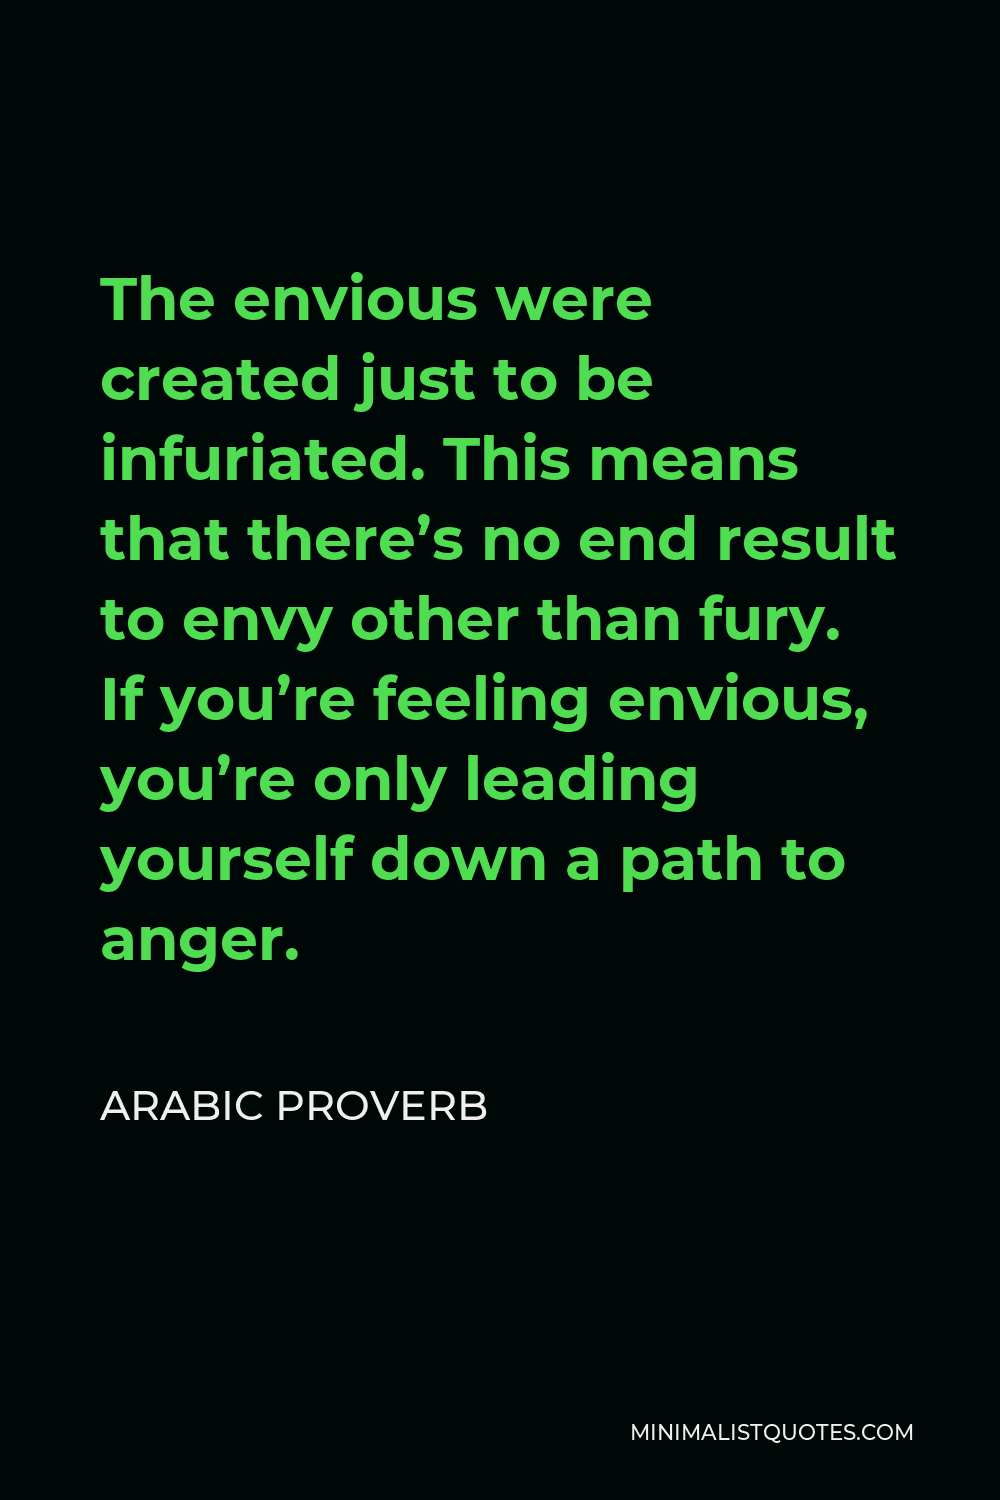 Arabic Proverb Quote - The envious were created just to be infuriated. This means that there’s no end result to envy other than fury. If you’re feeling envious, you’re only leading yourself down a path to anger.